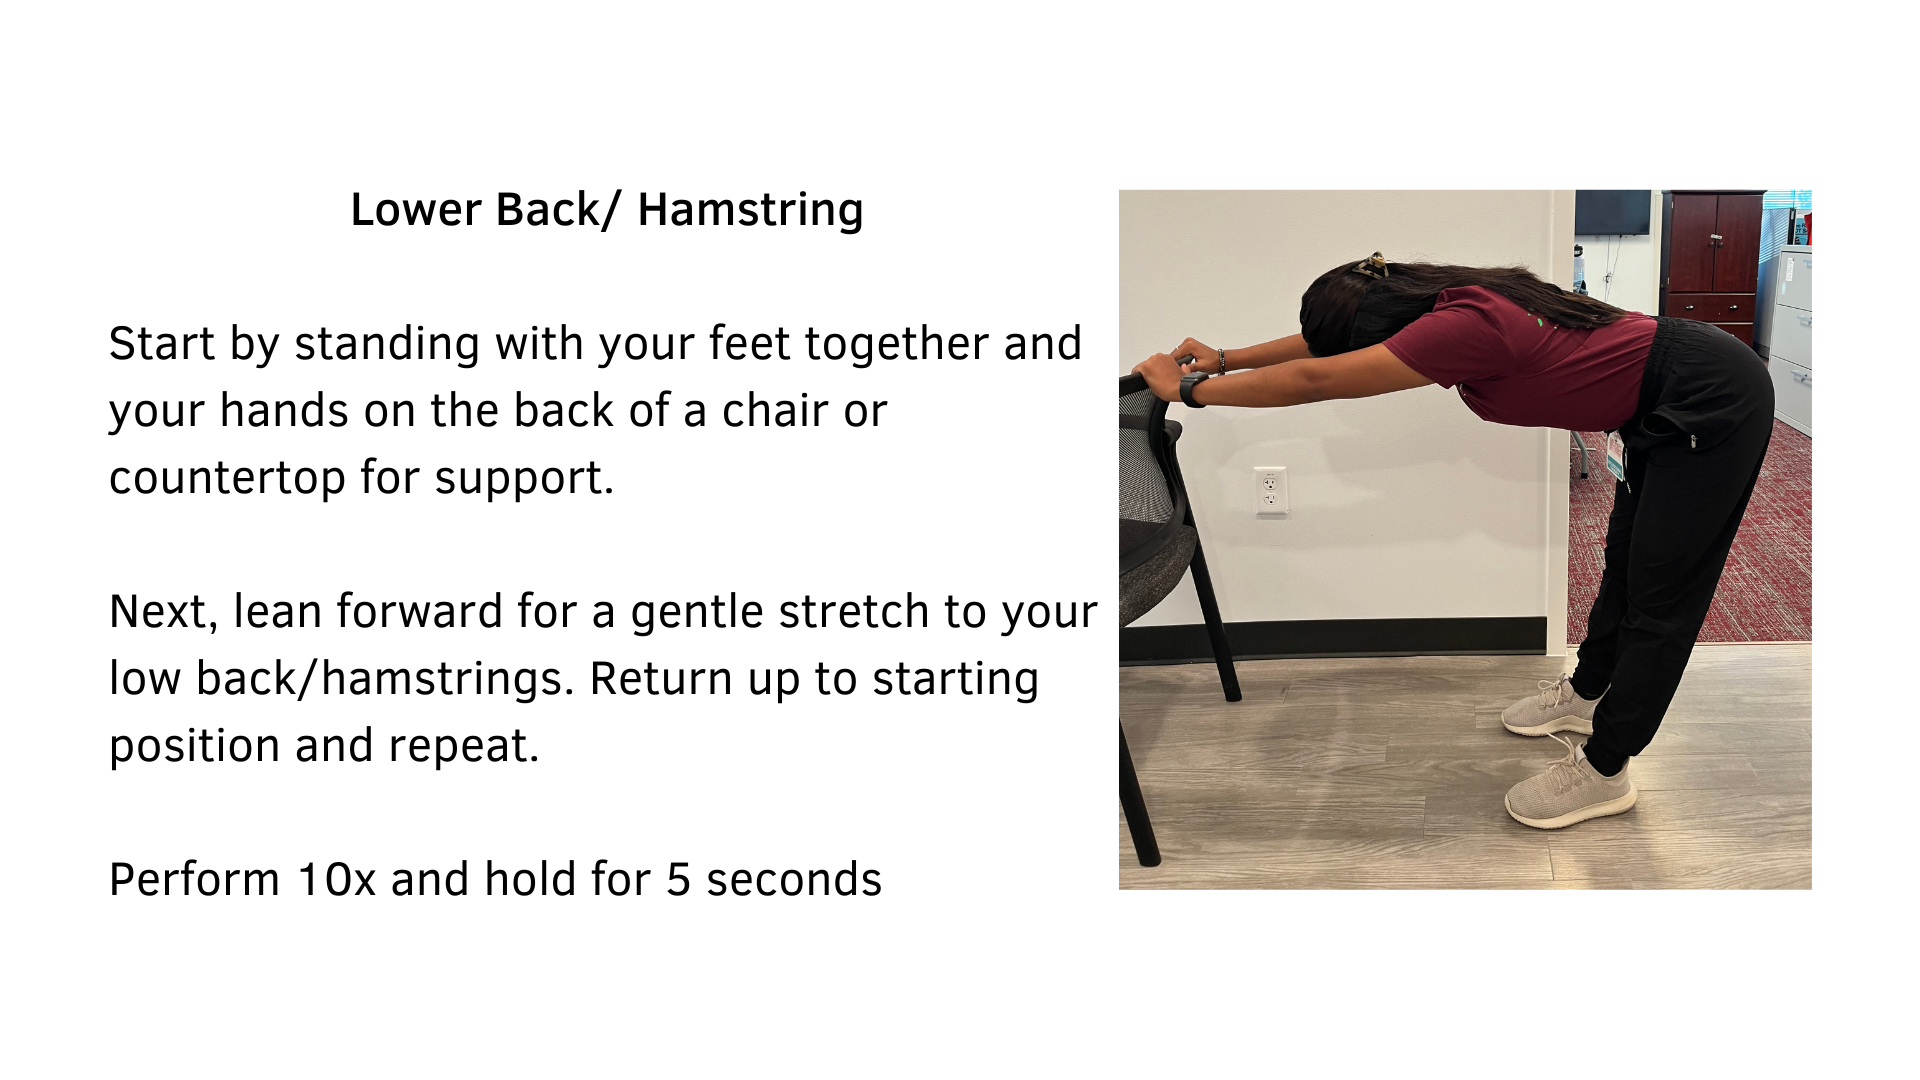 Black text on a white background that reads, "Lower Back/Hamstring: Start by standing with your feet together and your hands on the back of a chair or countertop for support. Next, lean forward for a gentle stretch to your low back/hamstrings. Return up to starting position and repeat. Perform 10x and hold for 5 seconds". Pictured is a woman performing the stretch using the back of a chair.